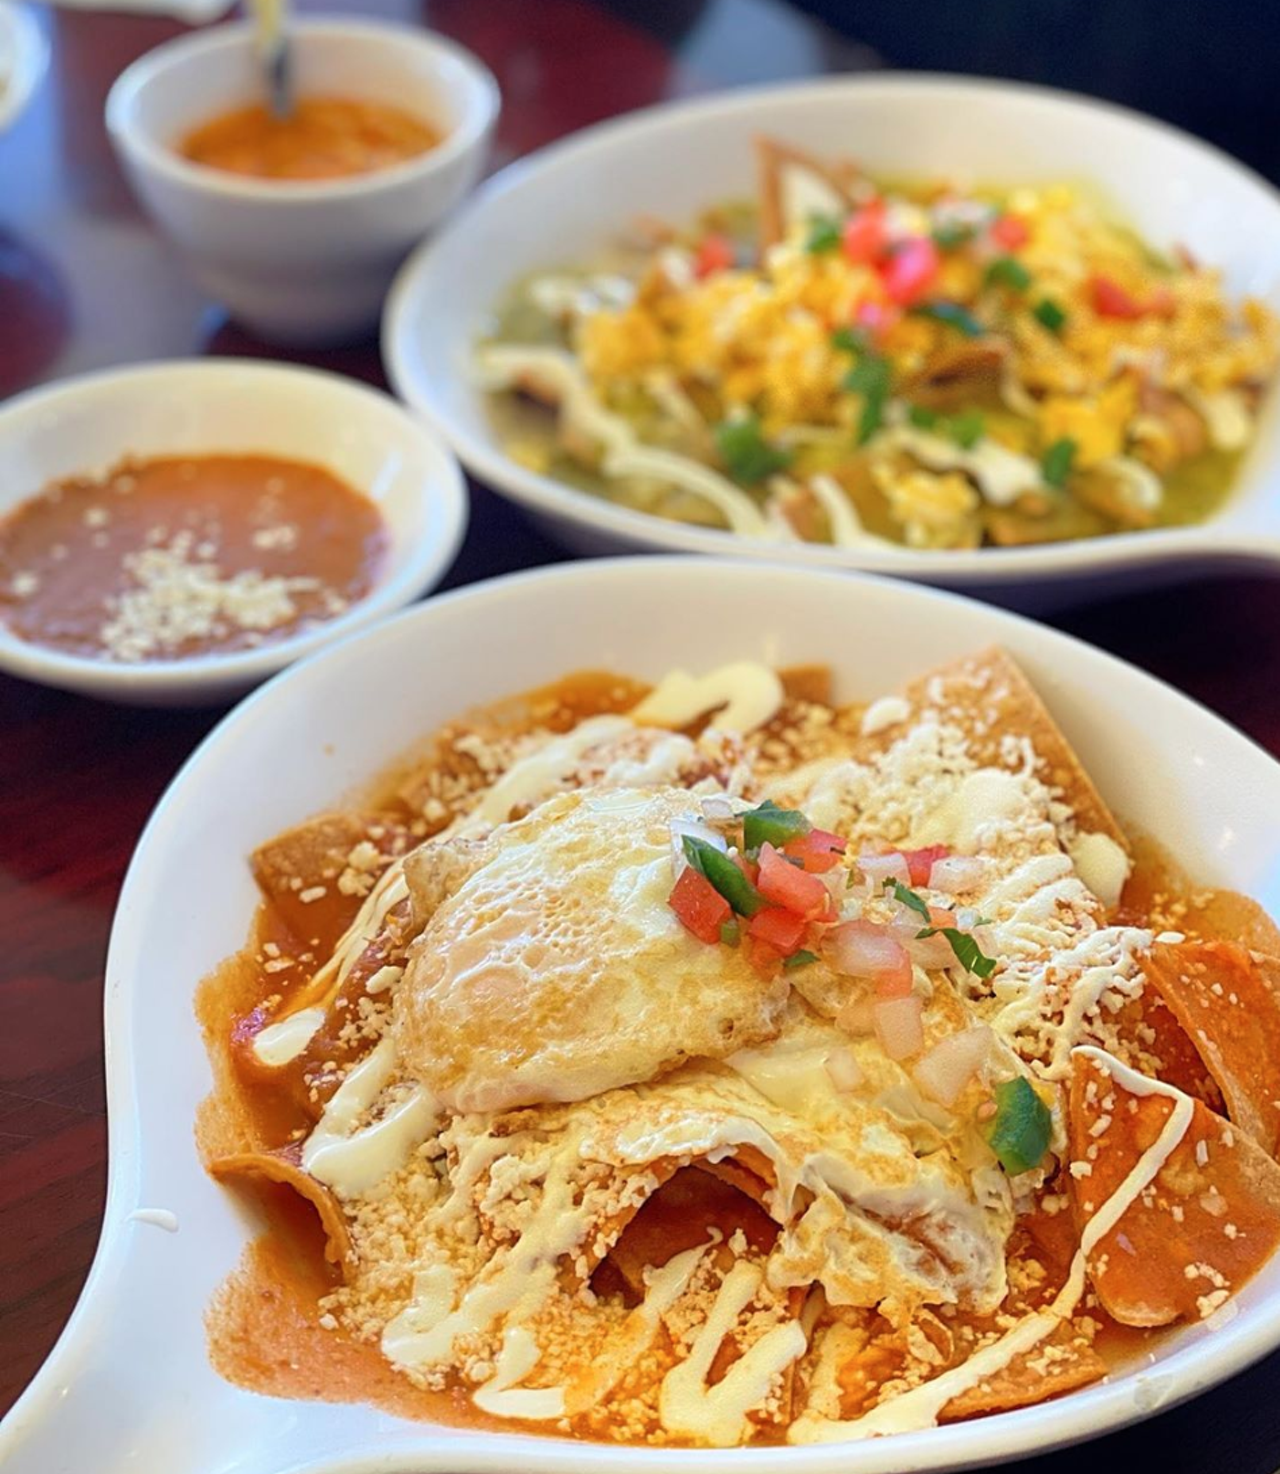 Vida Mia Mexican Cuisine
19141 Stone Oak Pkwy #803, (210) 490-2011, vidamiacuisine.com
Head to this Stone Oak eatery to take in some real-deal Mexican bites. Albondigas soup, asada de puerco, tampiquena and some out-of-this-world chilaquiles — you can find it all here.
Photo via Instagram / 210foodaddicts